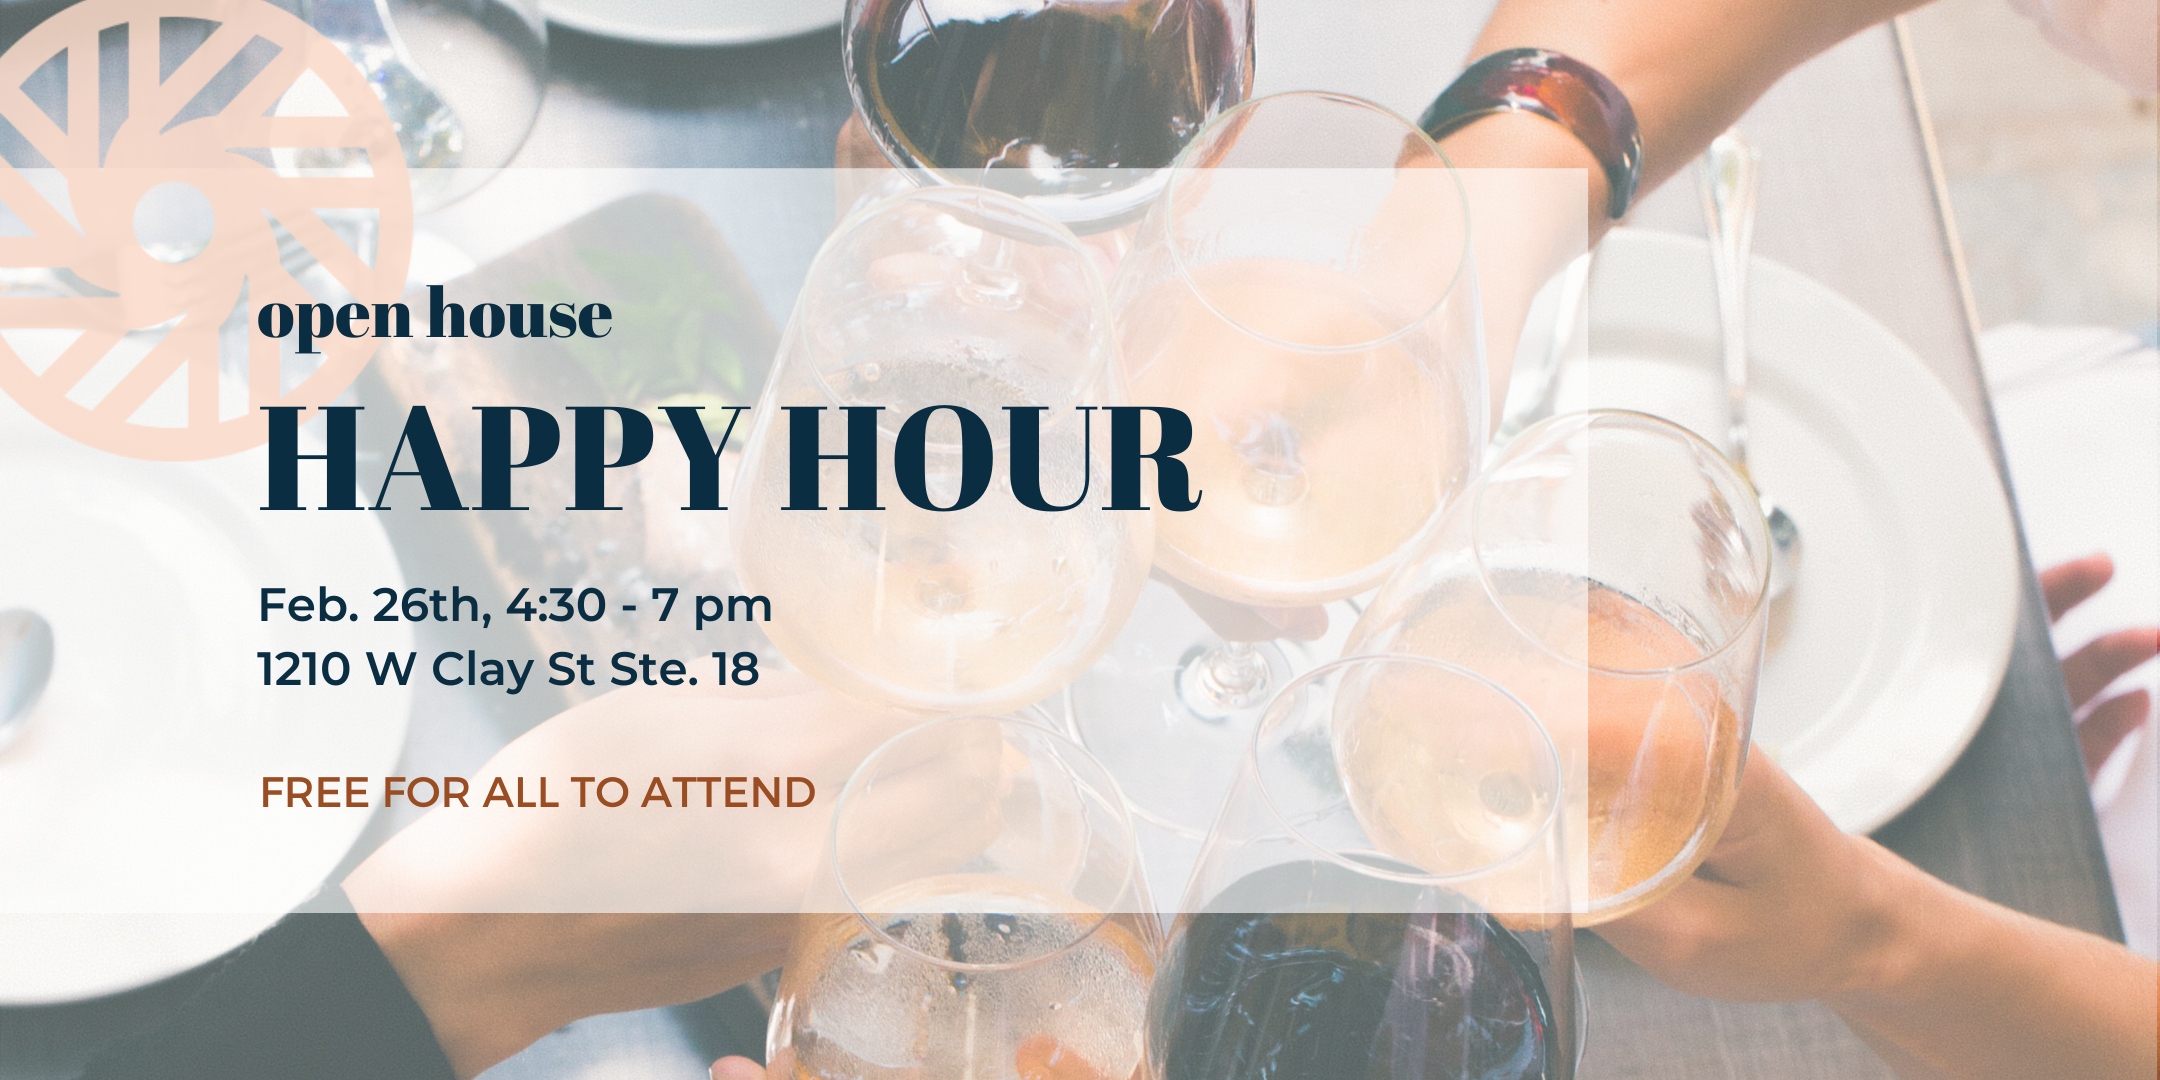 Open House Happy Hour at the Sesh Loft